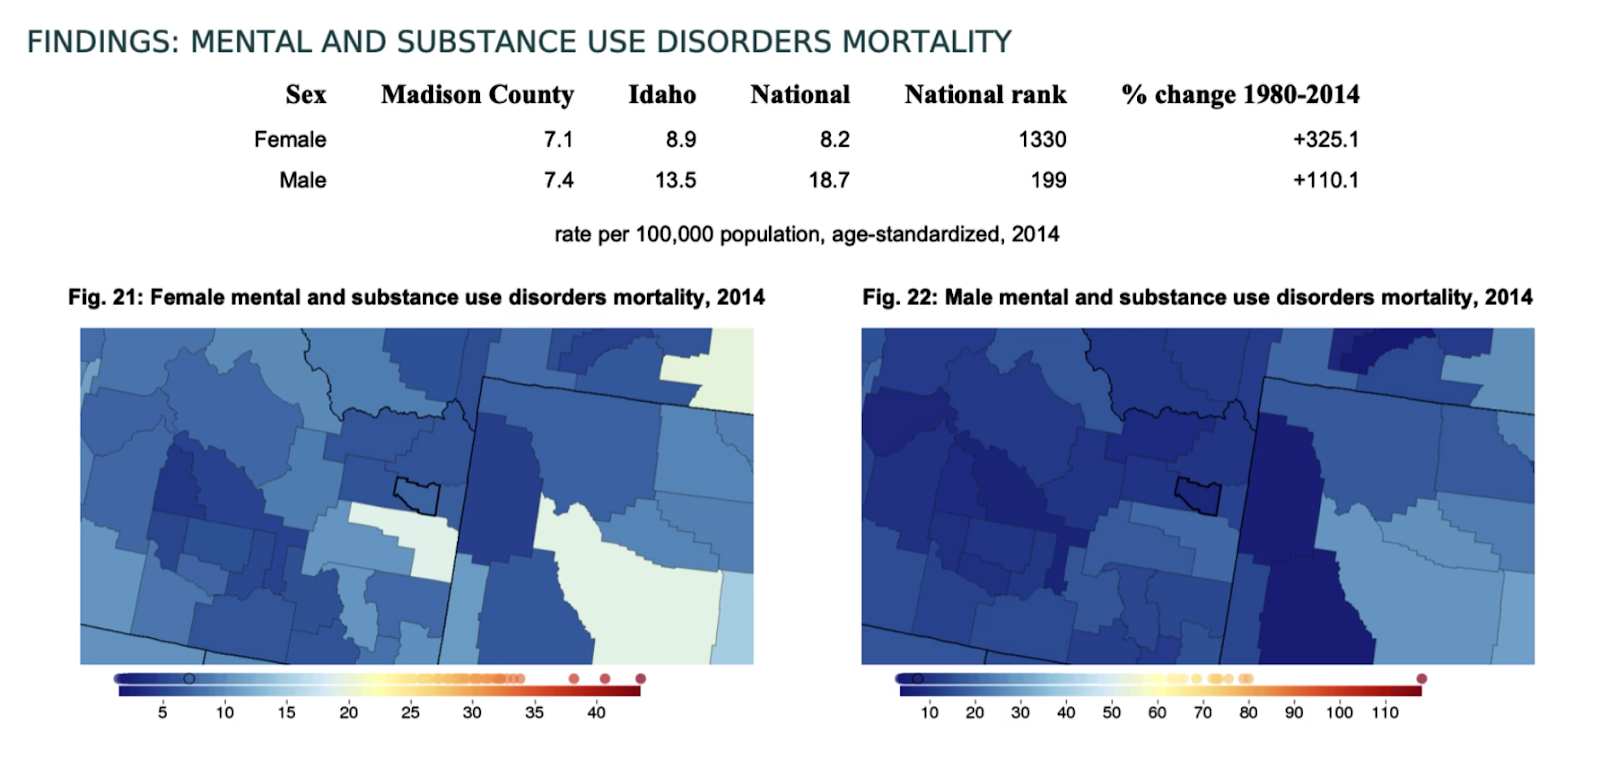 A chart and maps depicting the findings of Mental and Substance use disorders mortality. See the appendix for a more in-depth description.